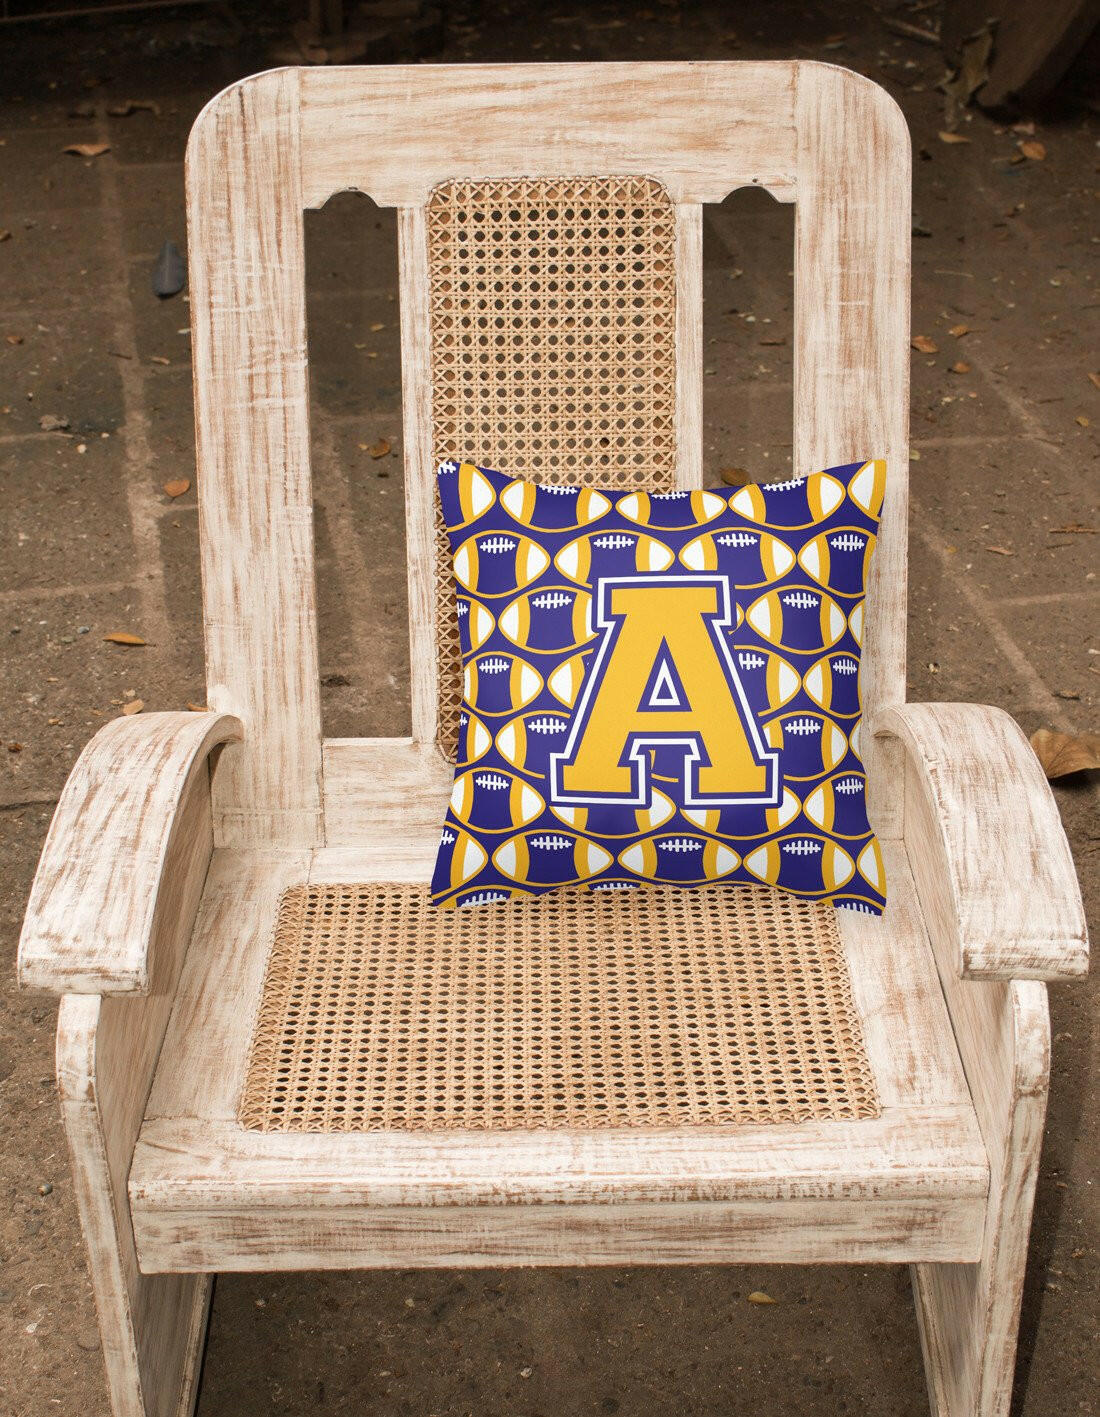 Letter A Football Purple and Gold Fabric Decorative Pillow CJ1064-APW1414 by Caroline's Treasures